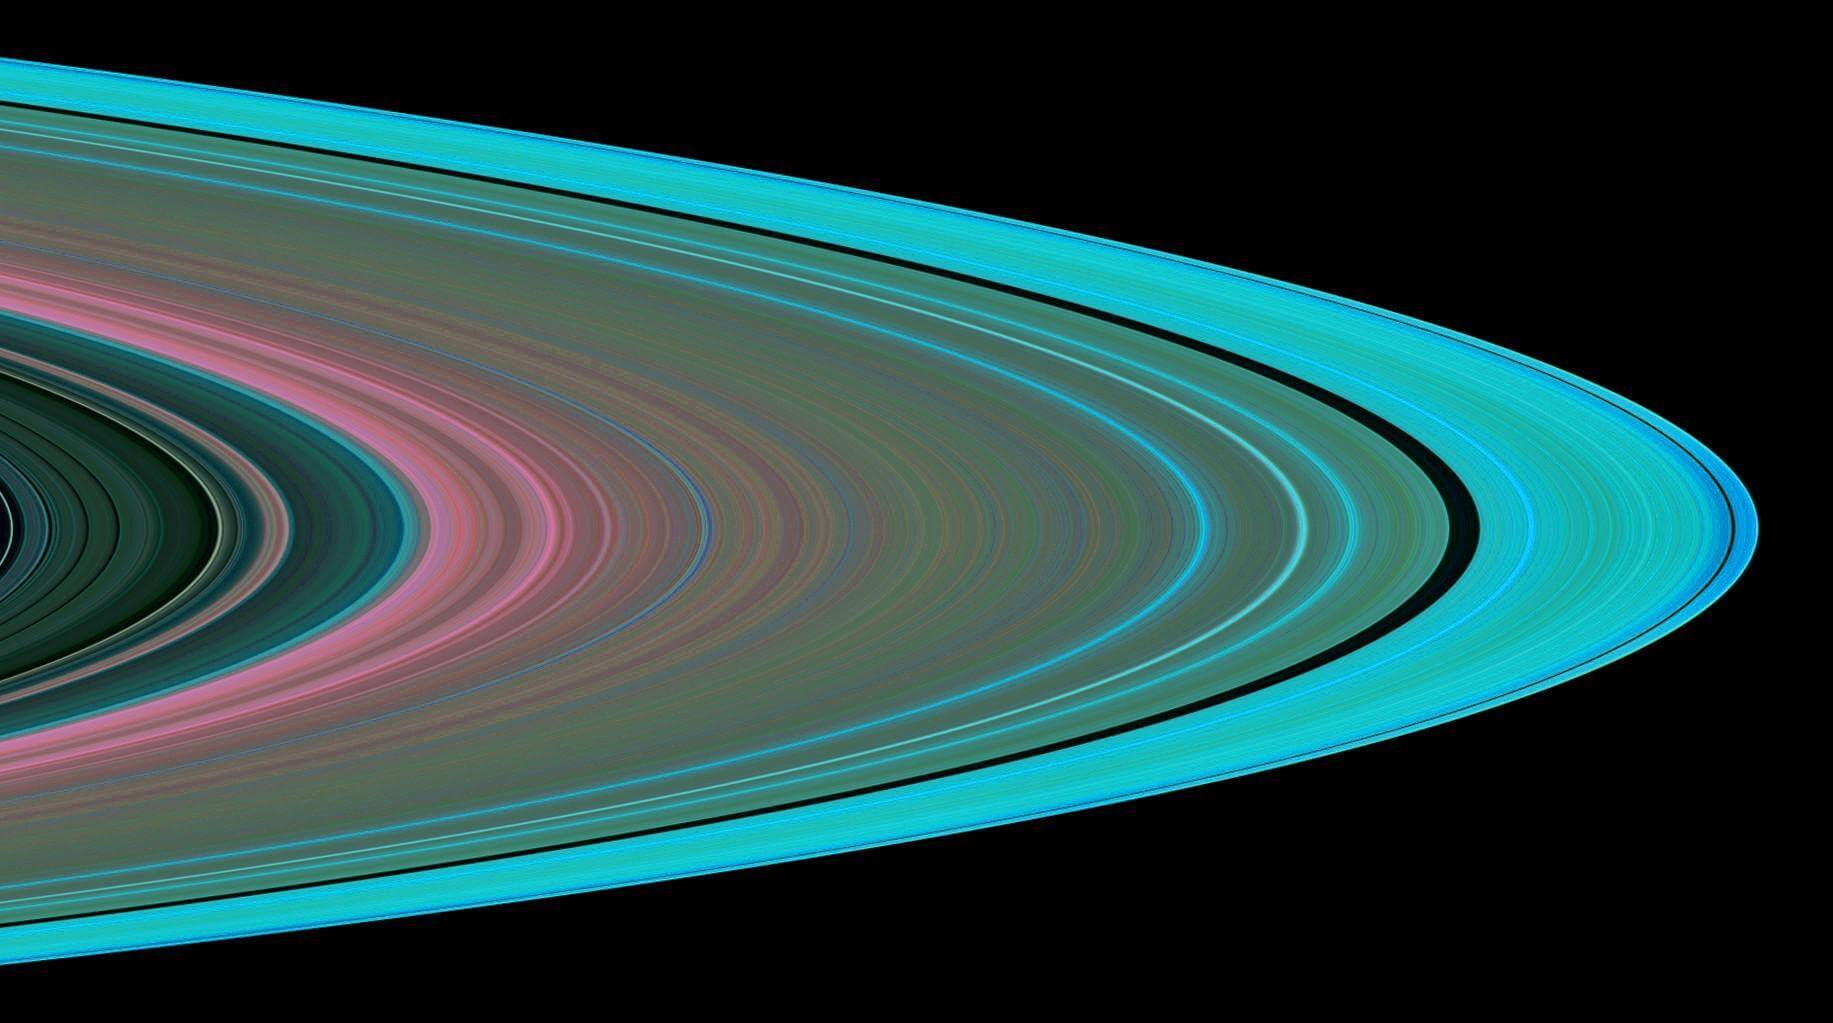 Now it's official — scientists have found that Saturn loses its rings